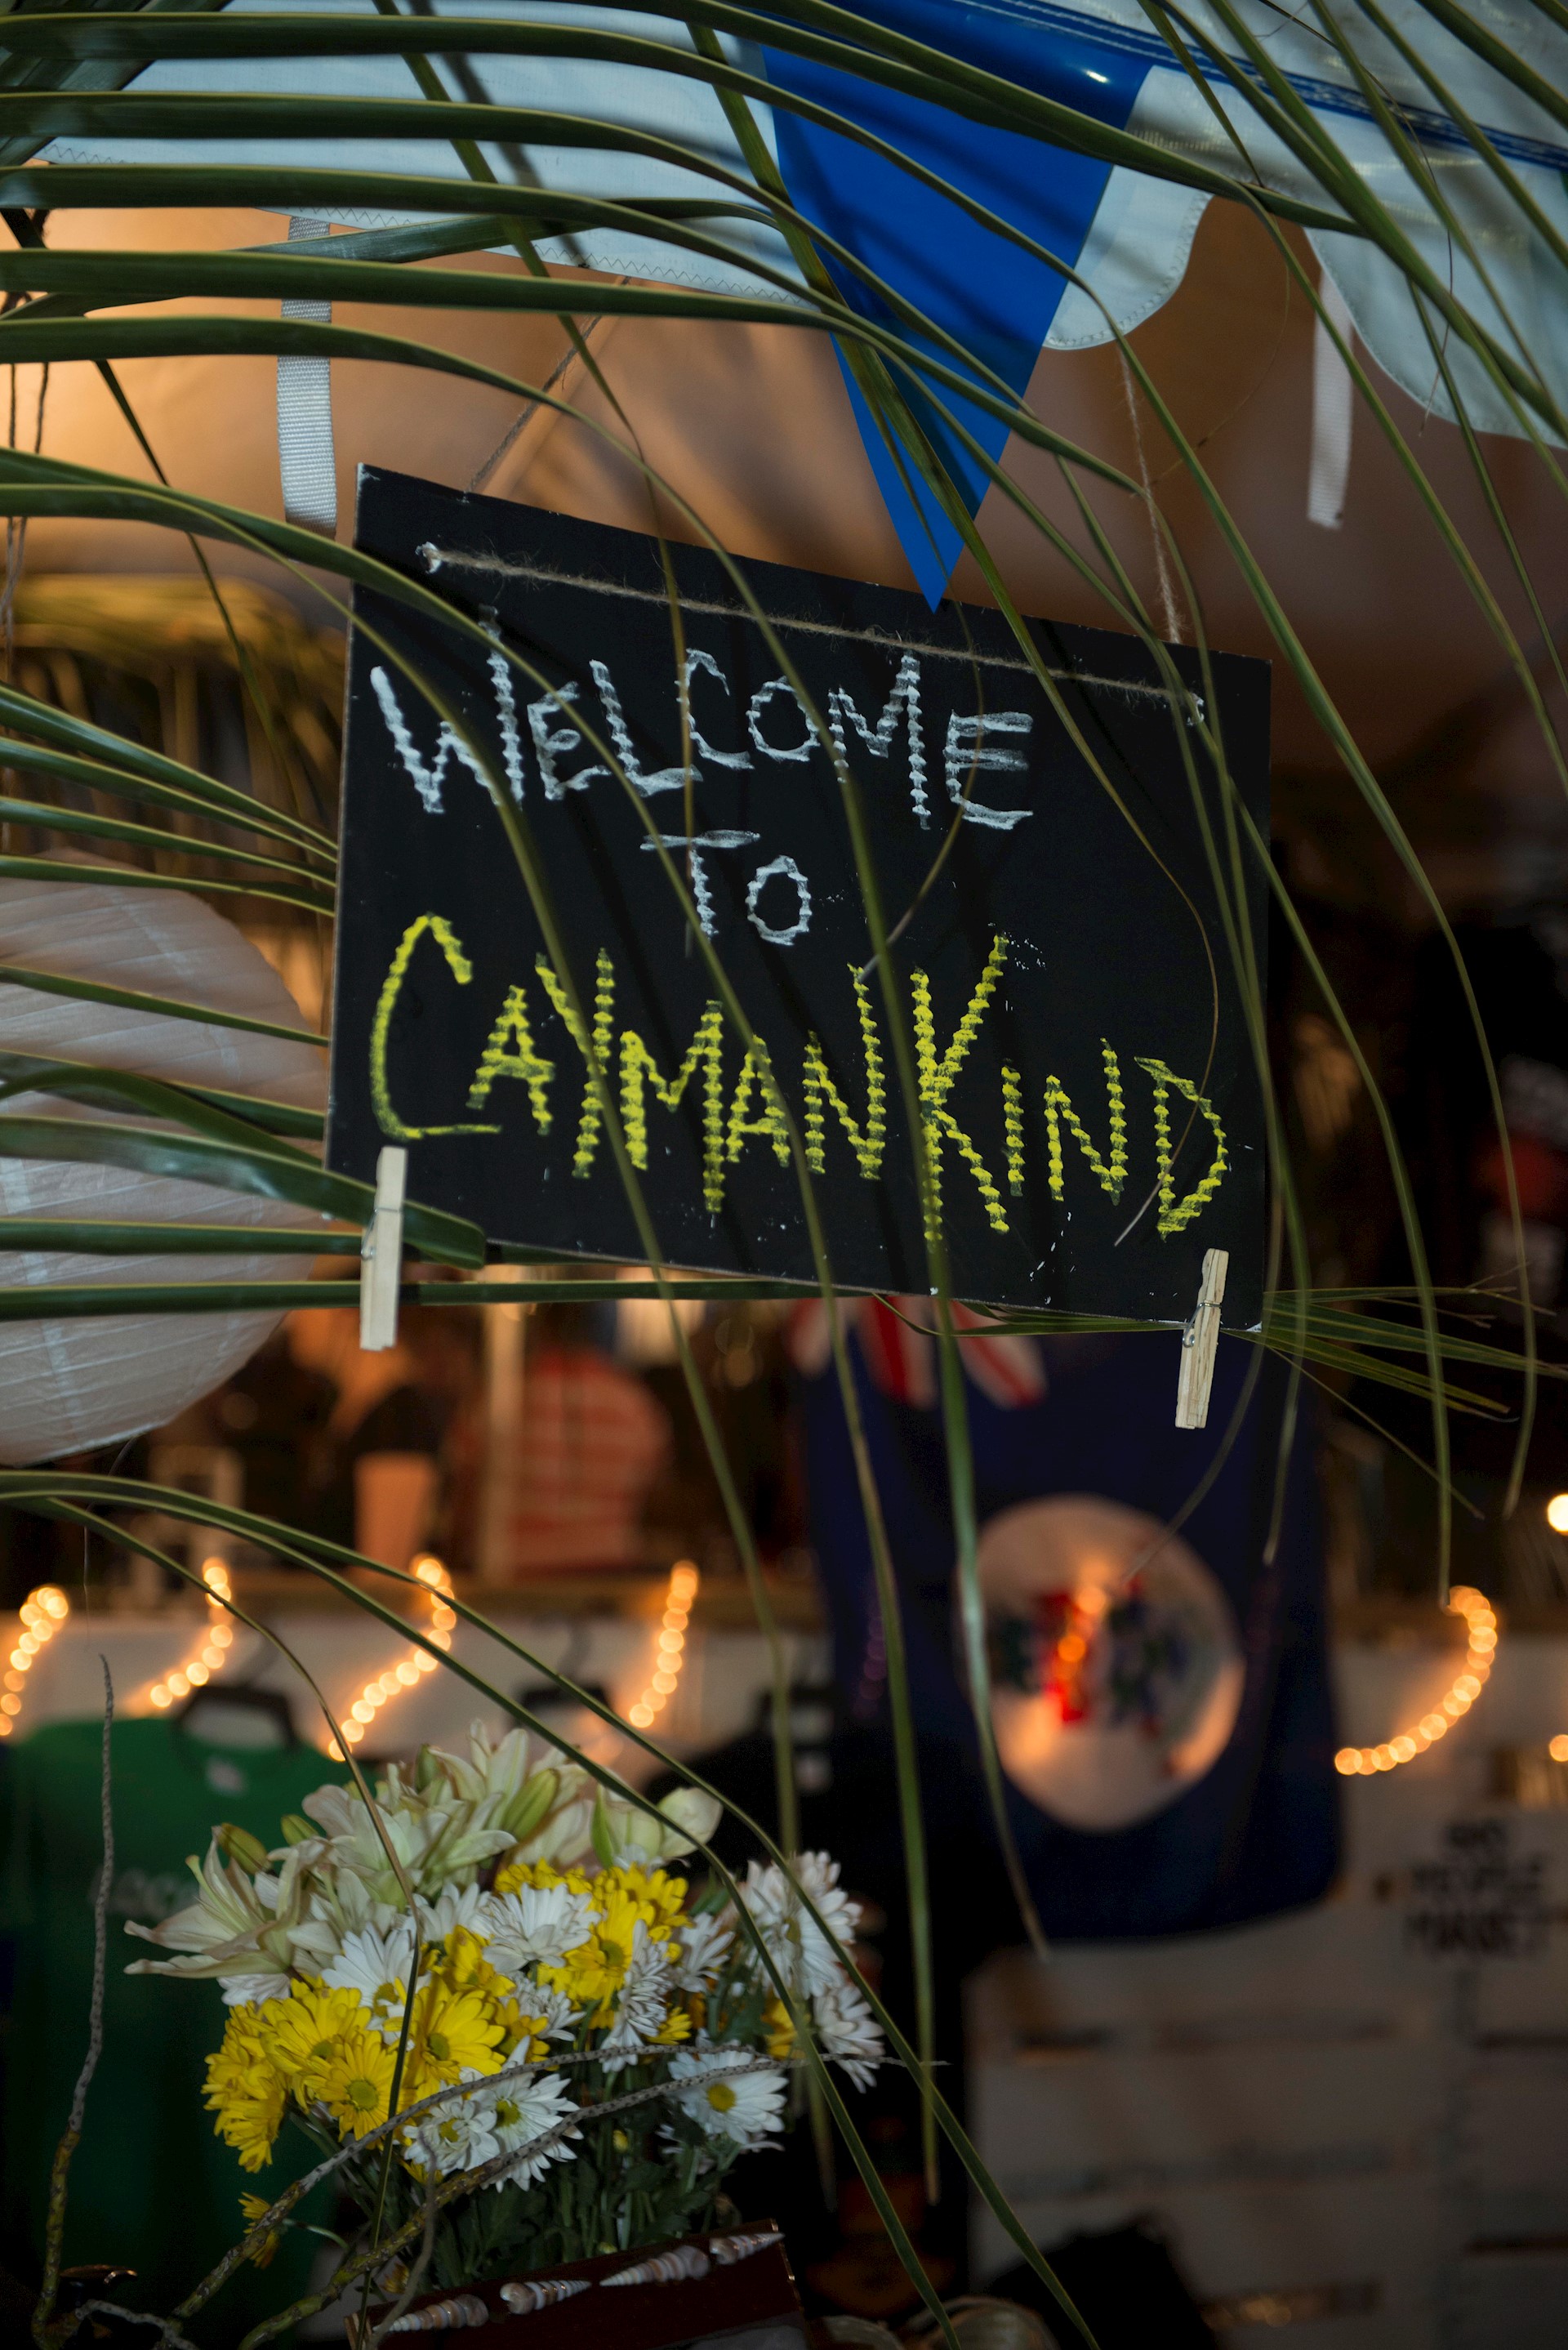 caymankind sign